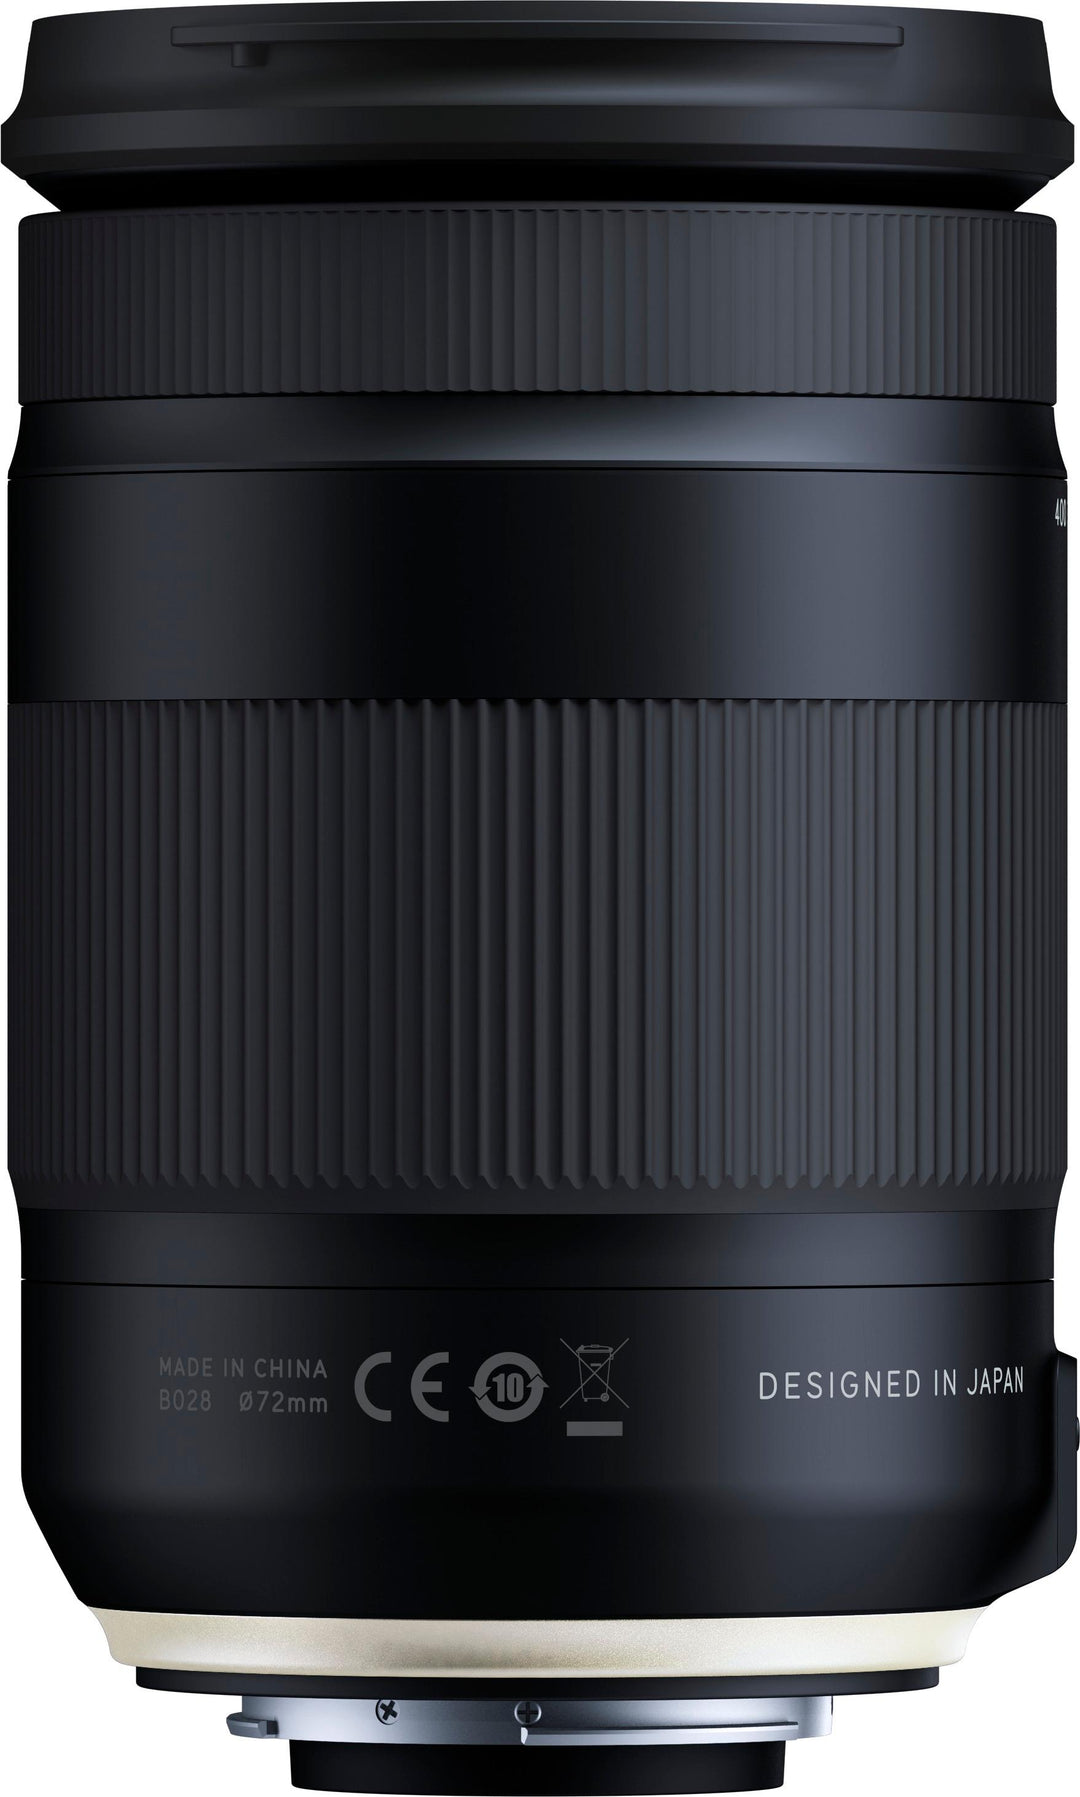 Tamron - 18-400mm F/3.5-6.3 Di II VC HLD All-In-One Telephoto Lens for Nikon APS-C DSLR Cameras - black_3